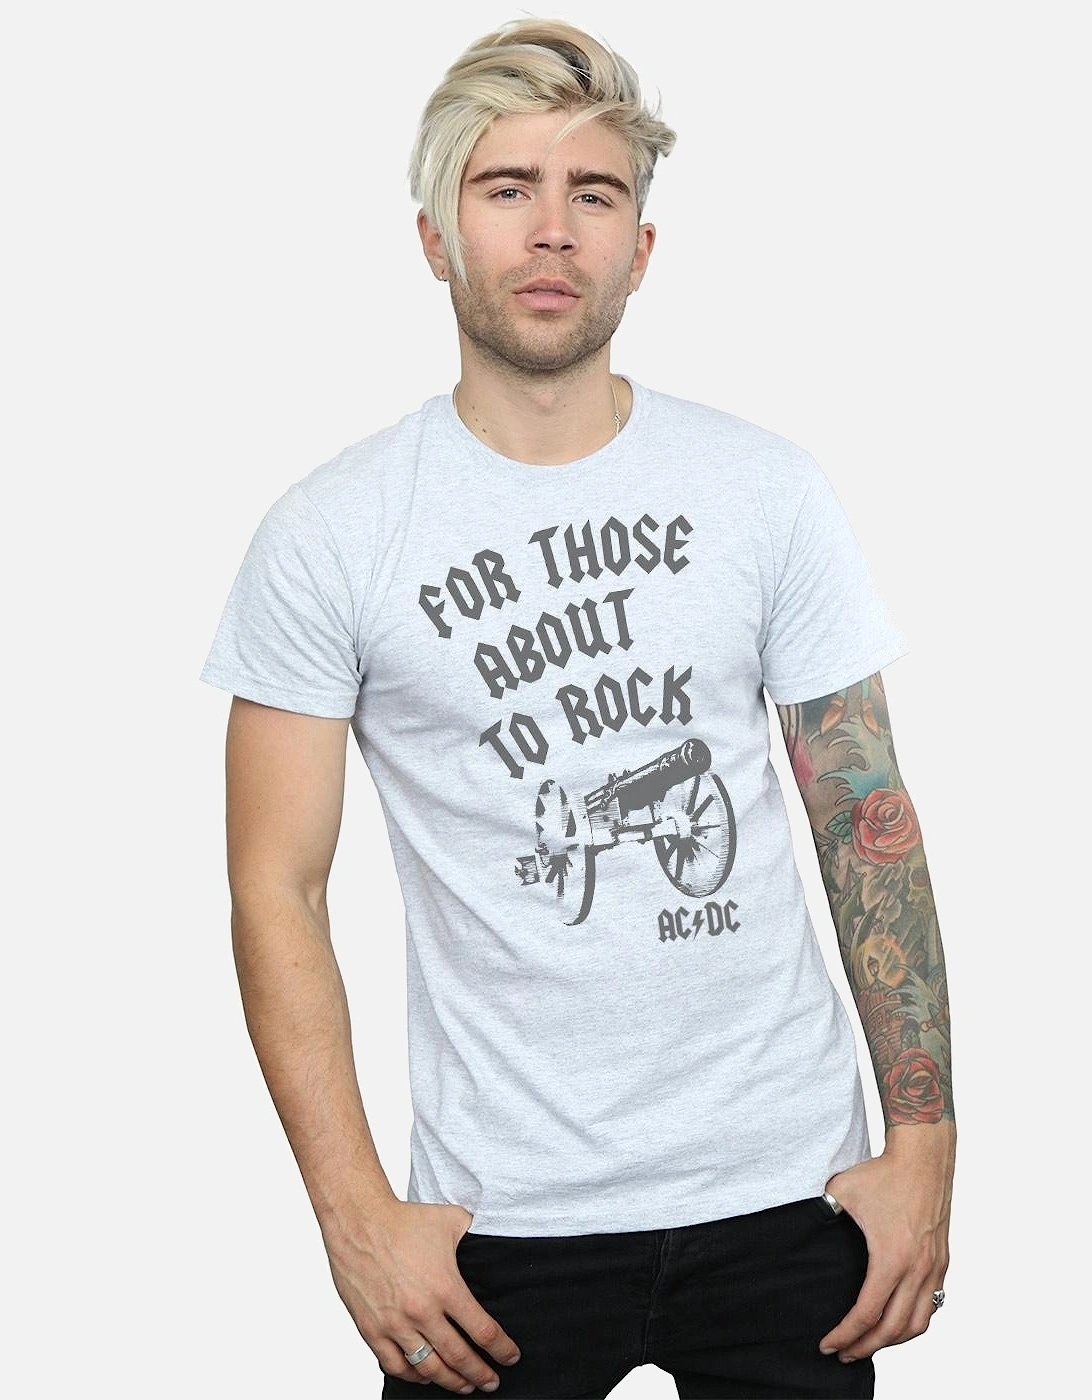 Mens For Those About To Rock Cannon T-Shirt